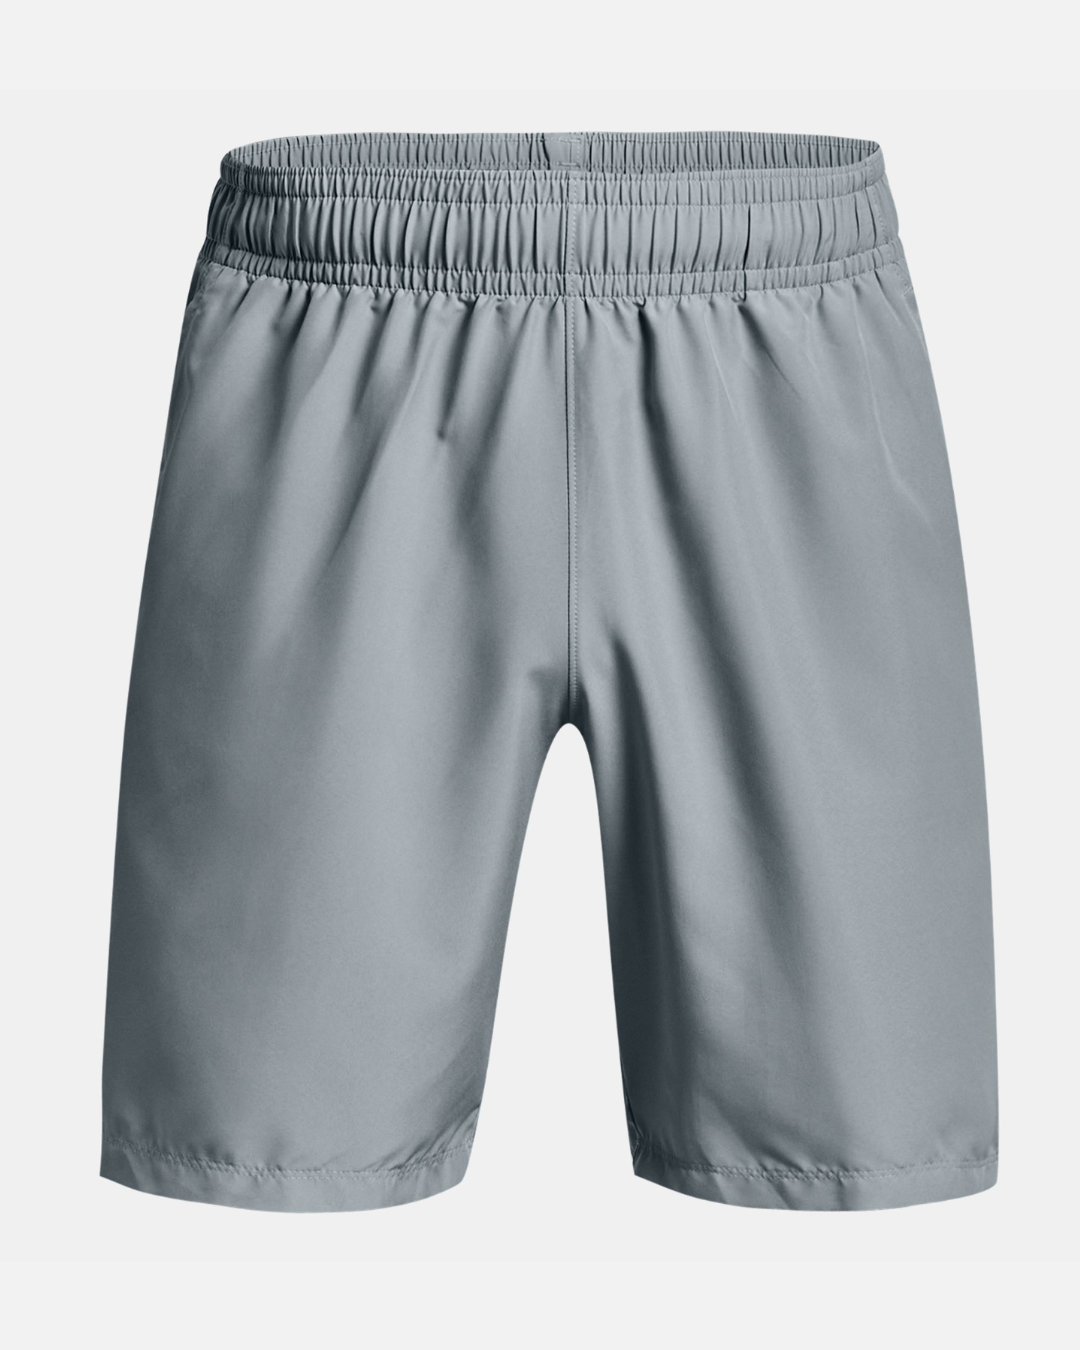 Under Armor Woven Graphic Shorts - Grey/Yellow